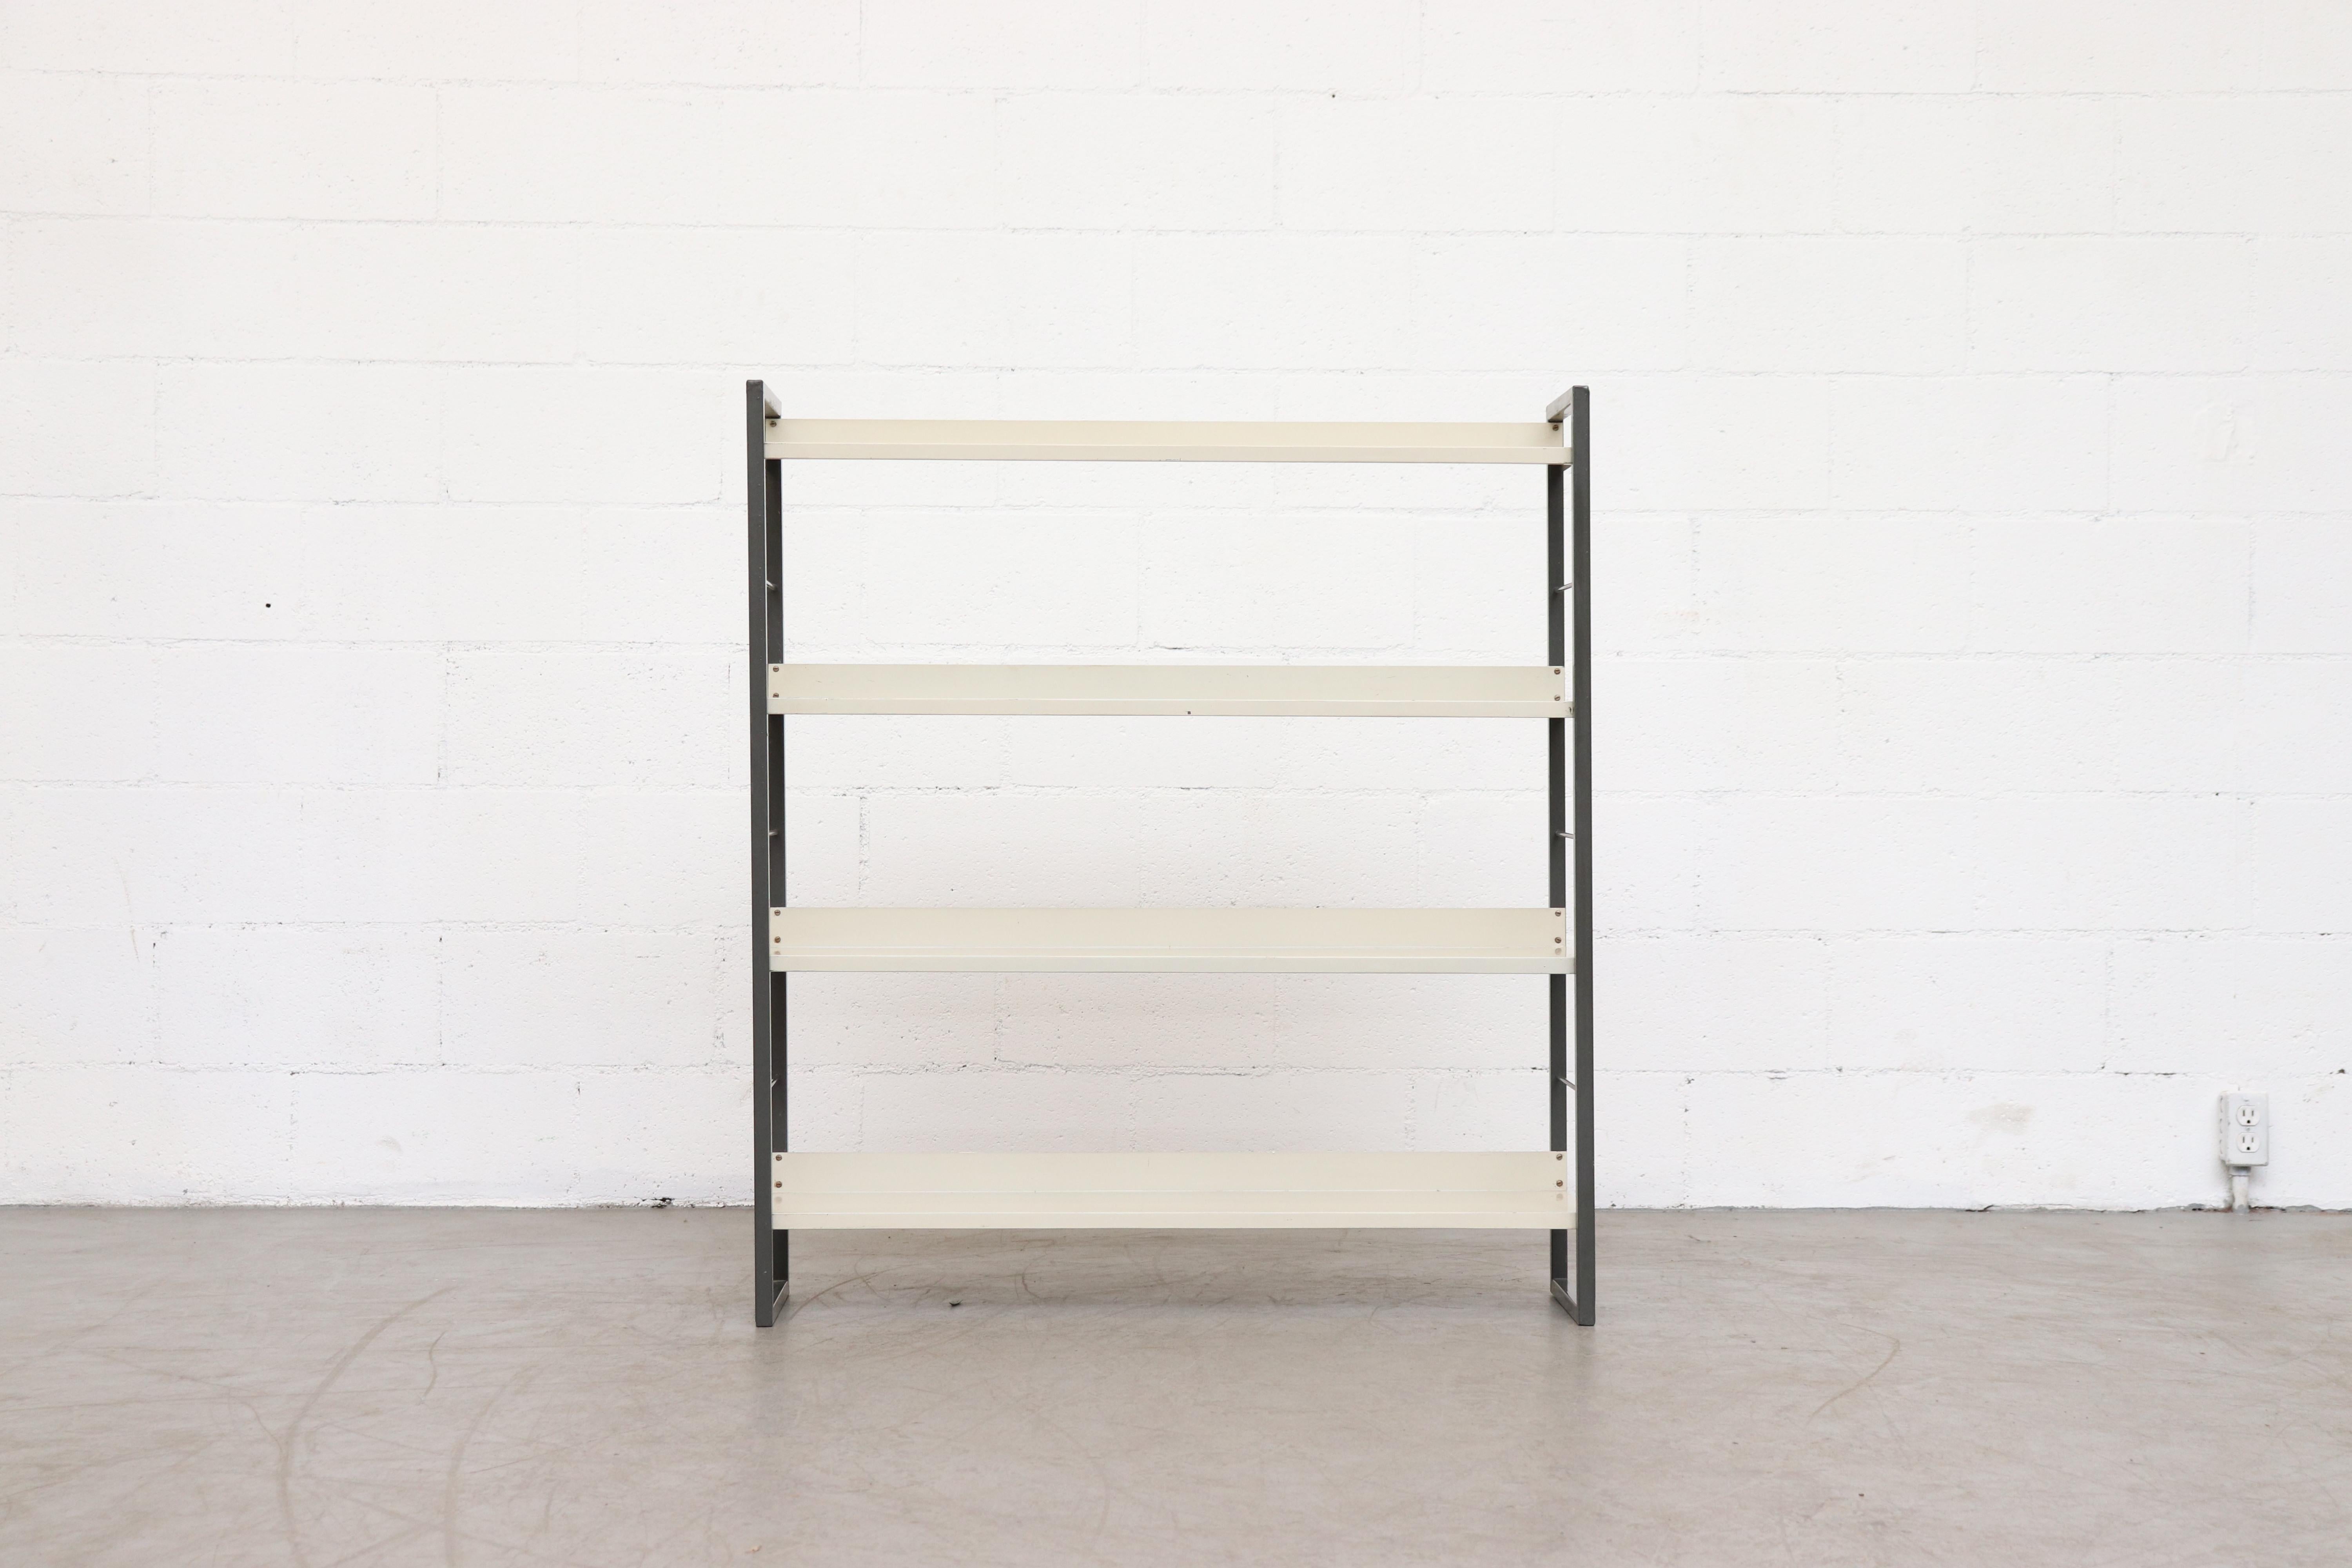 Industrial Tomado enameled metal shelving unit. Charcoal grey enameled metal frame with 4 ivory sheet metal shelves. In good original condition with visible signs of wear including minimal denting, scratching and surface rust, all consistent with